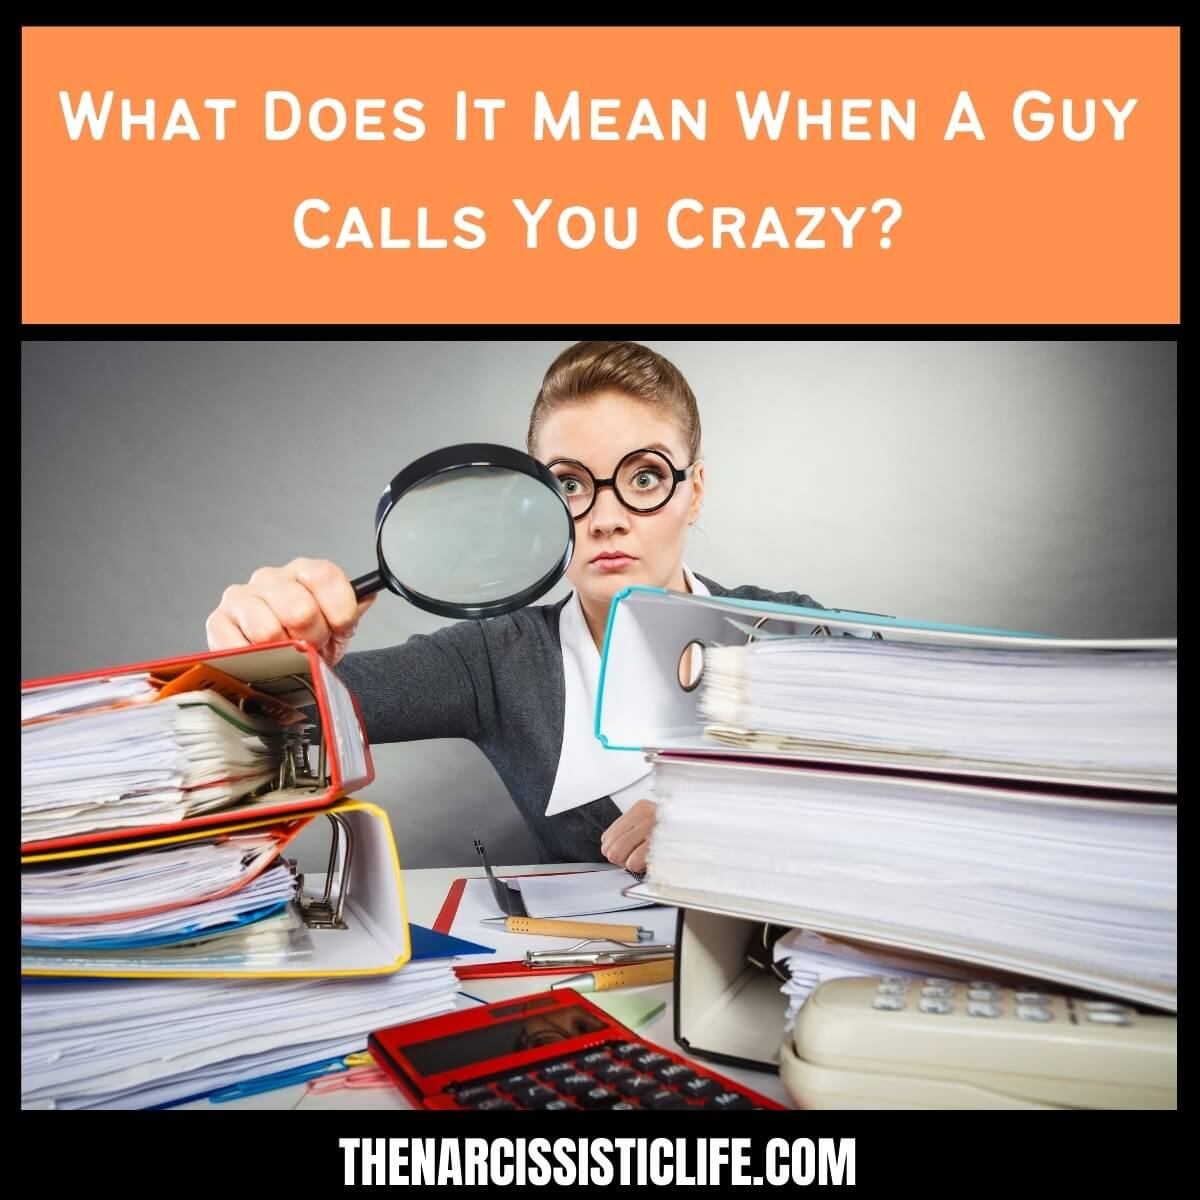 What Does It Mean When A Guy Calls You Crazy?